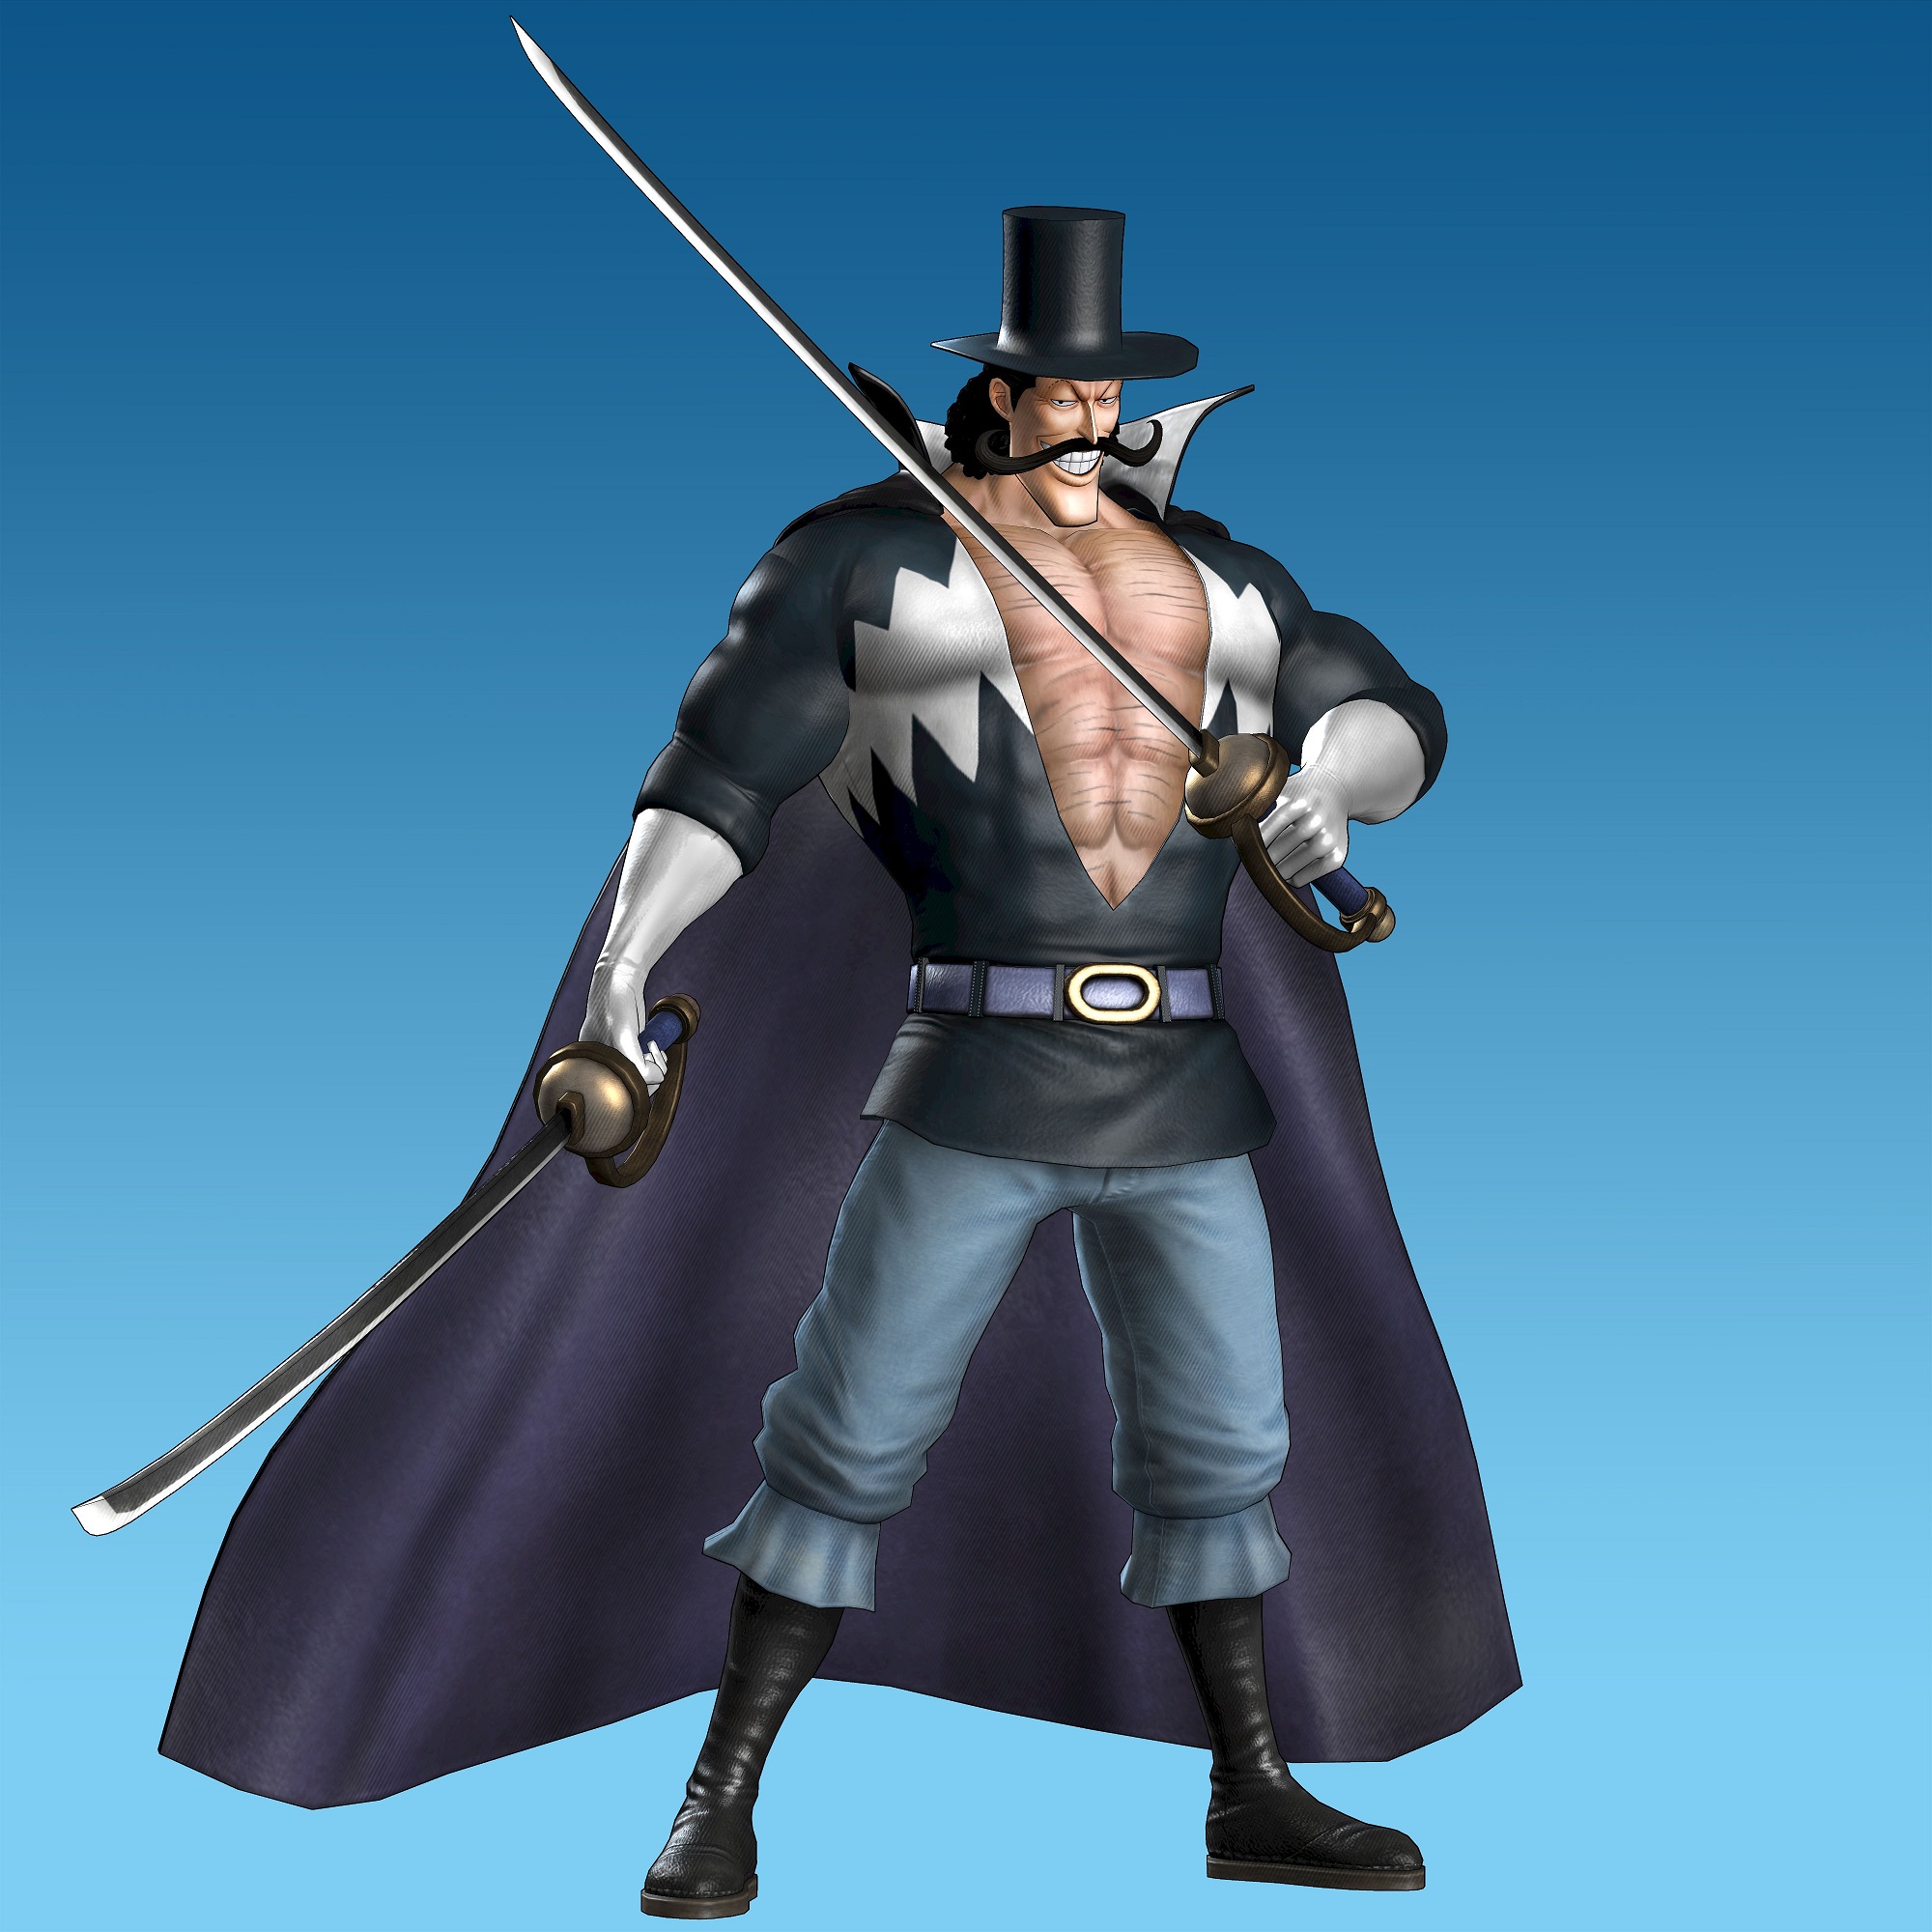 One Piece: Pirate Warriors 2 screens show off Ace, Buggy and Vista ...